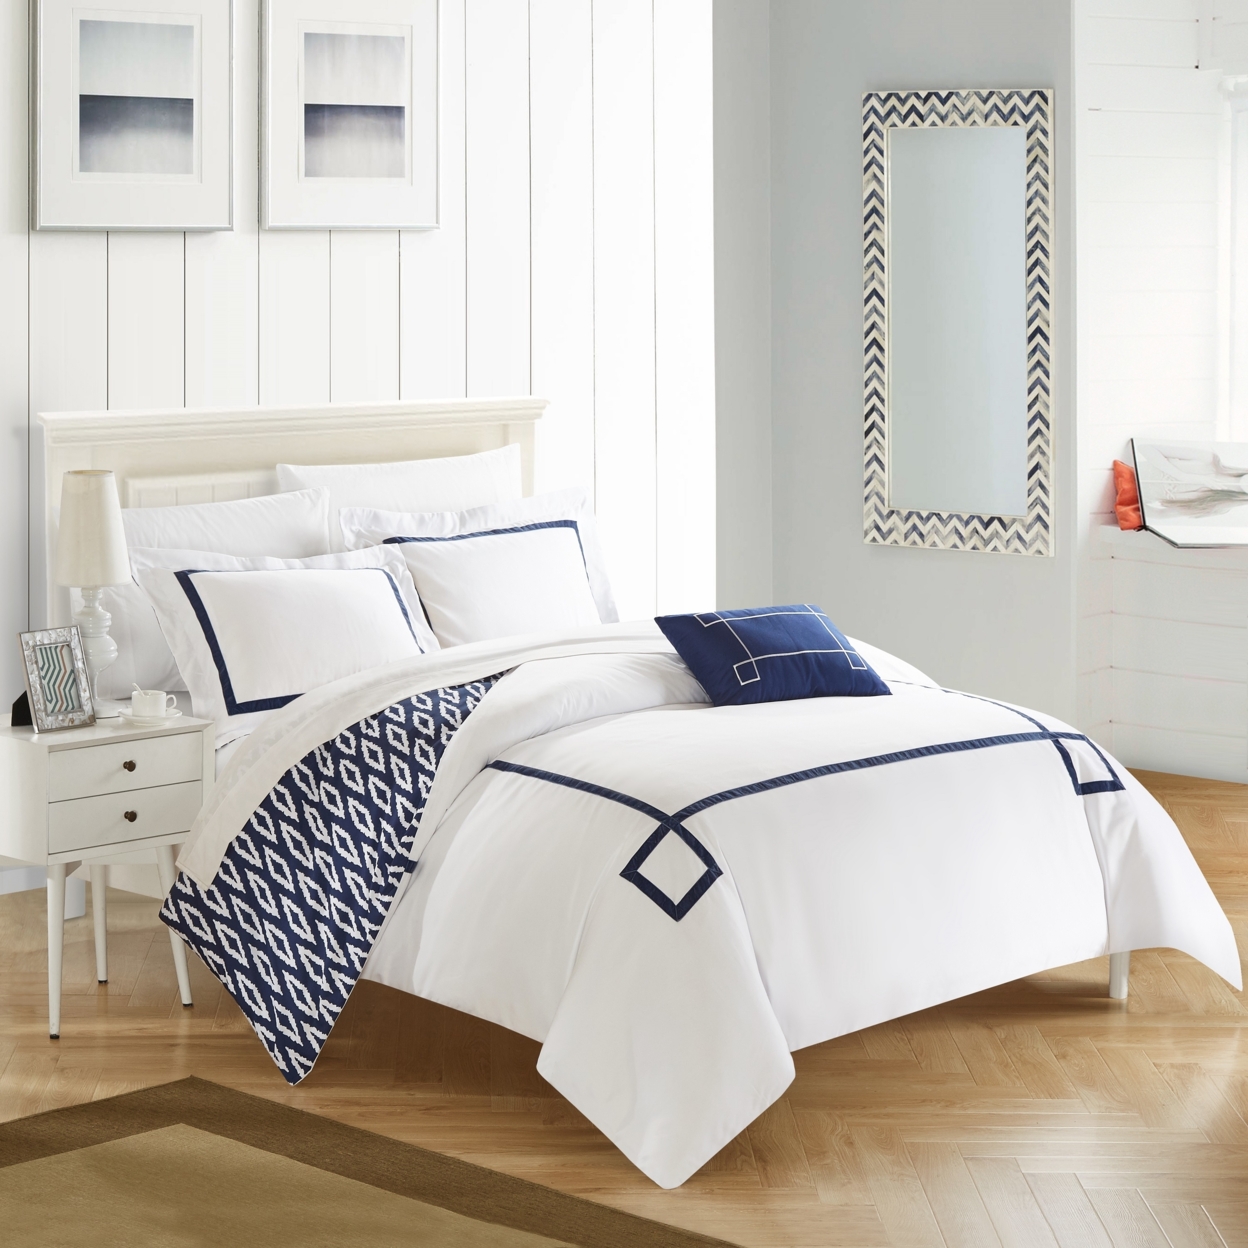 3/4 Piece Berwin Embroidered REVERSIBLE Duvet Cover Set With Shams And Decorative Pillows Included - Navy, Queen